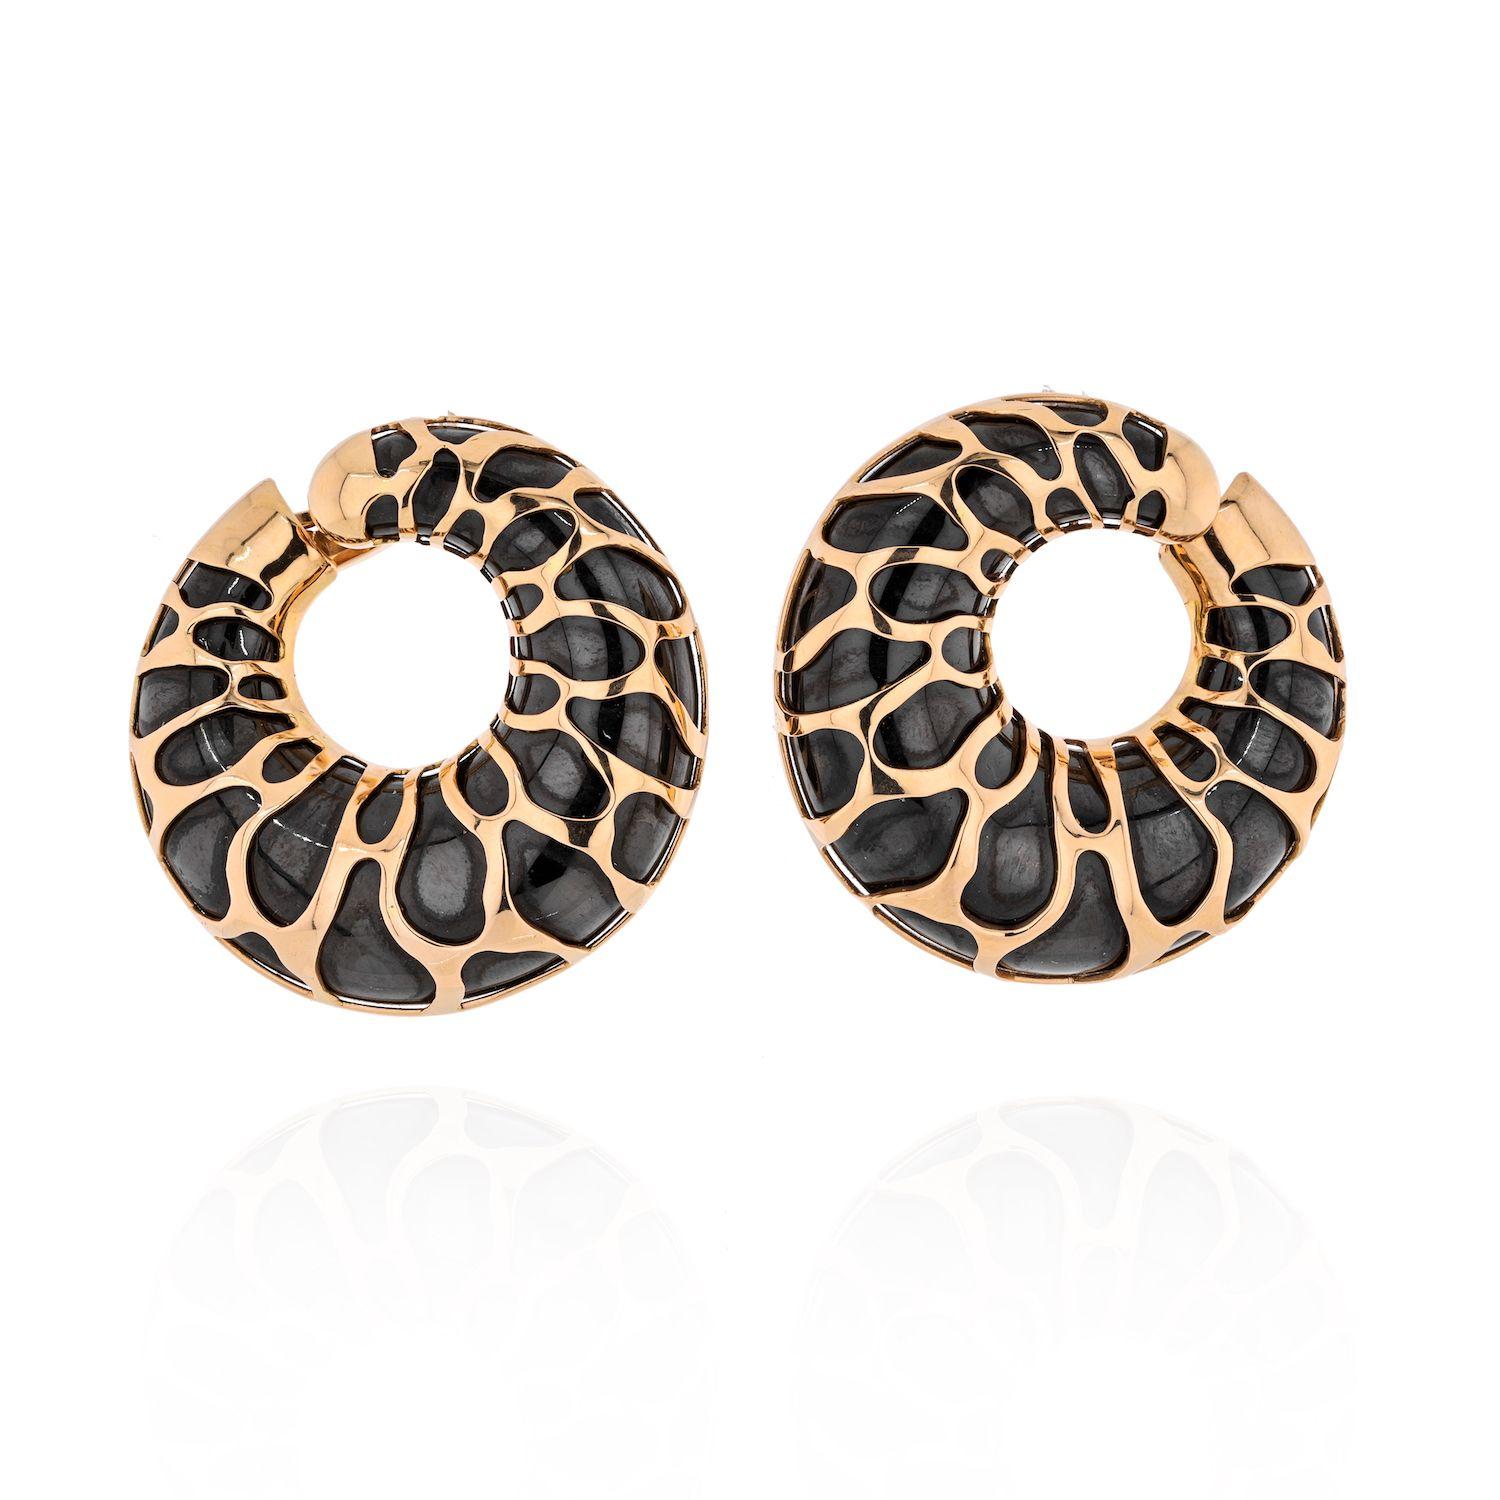 Make a bold statement with these hoop earrings created by Marina B in Italy in the 1989. Unusual combination of blackened metal and 18k yellow gold, giraffe motif pattern and voluminosity are the highlights of these stunning earrings.

They measure